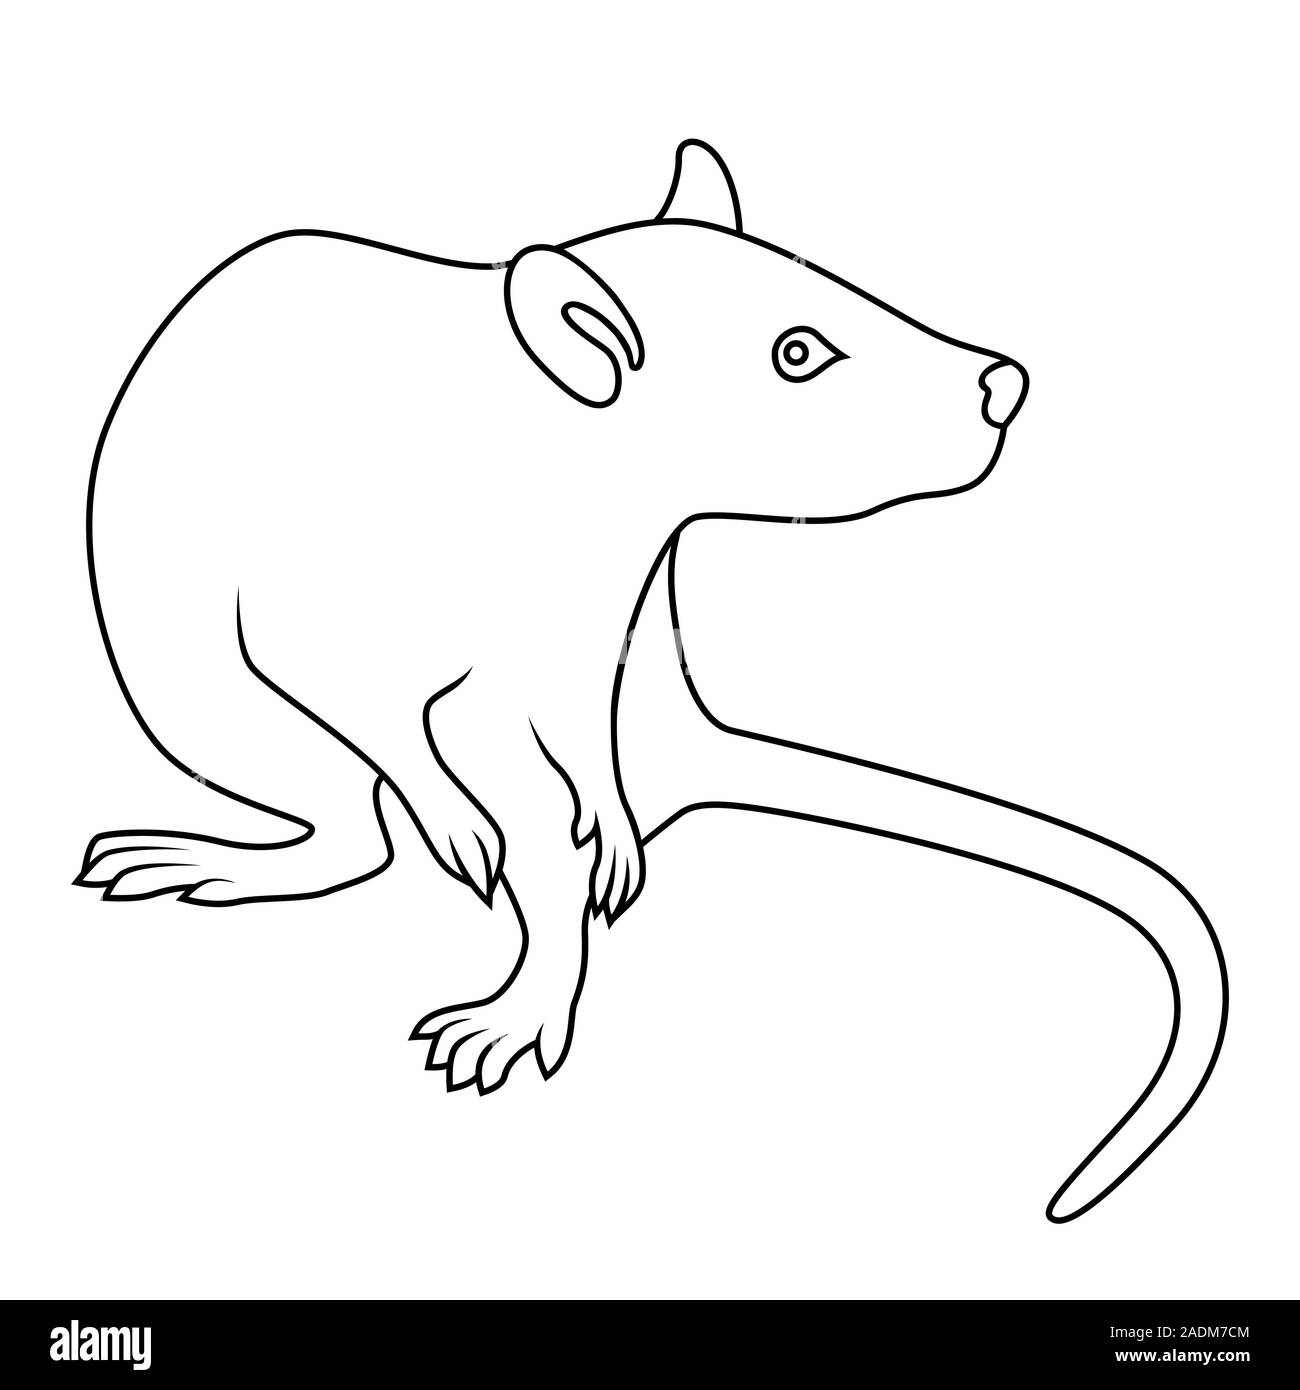 Black outline of Zodiac Sign Rat, symbol of New Year on the Eastern calendar, hand drawn illustration isolated on a white background Stock Vector